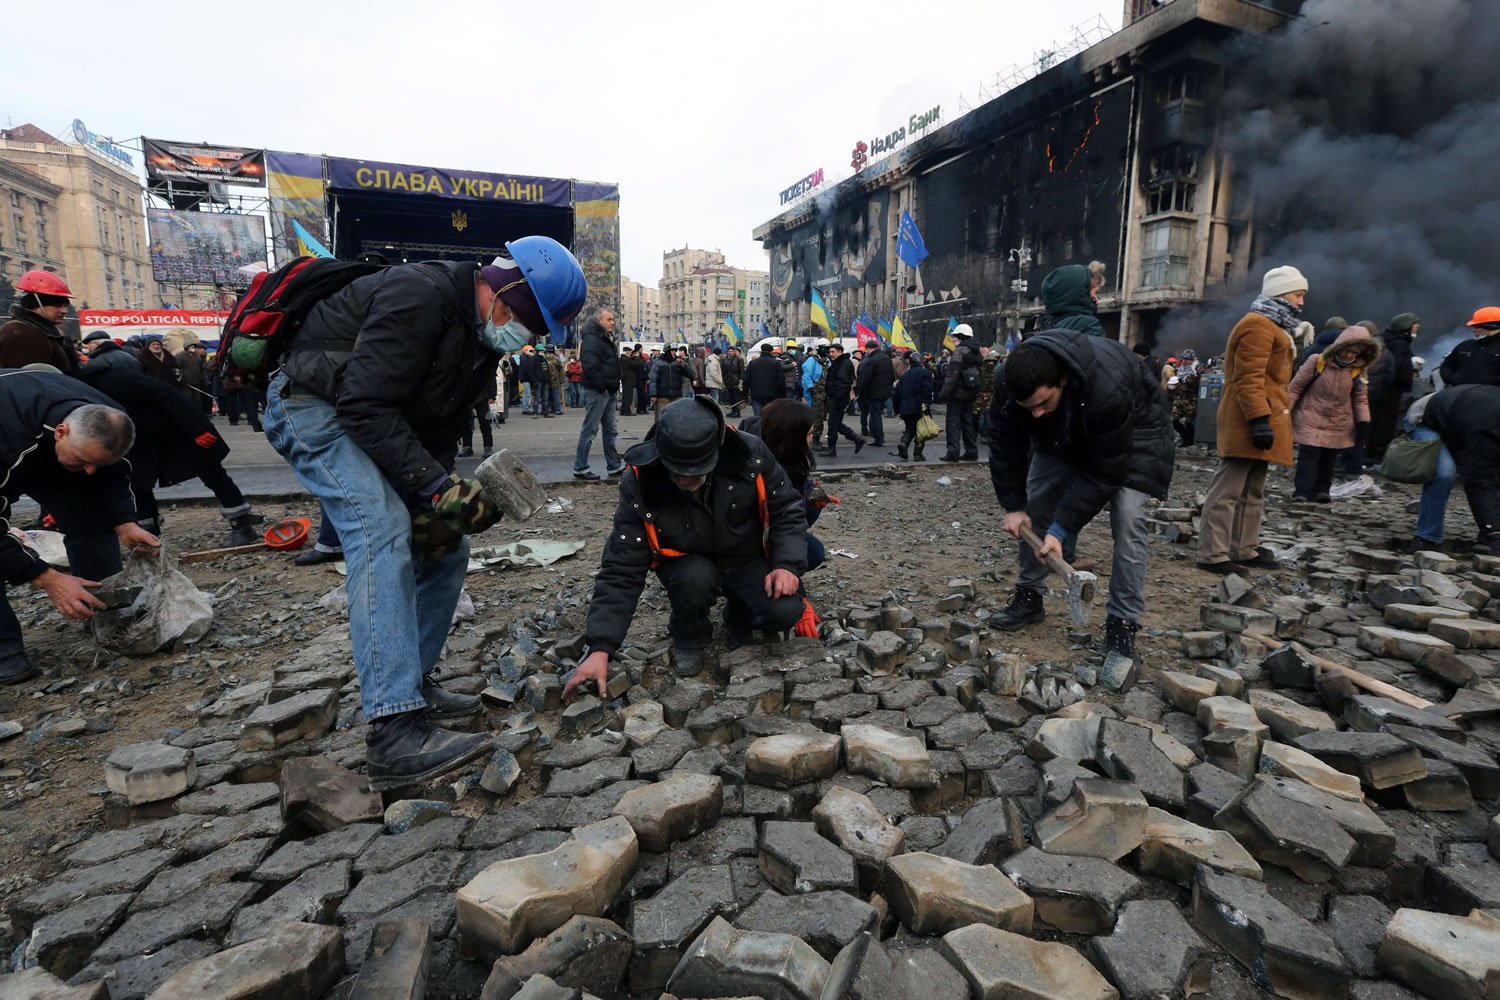 Protesters dig cobblestones out of the Independence Square surface to hurl at police in Kiev, Ukraine, on Wednesday.